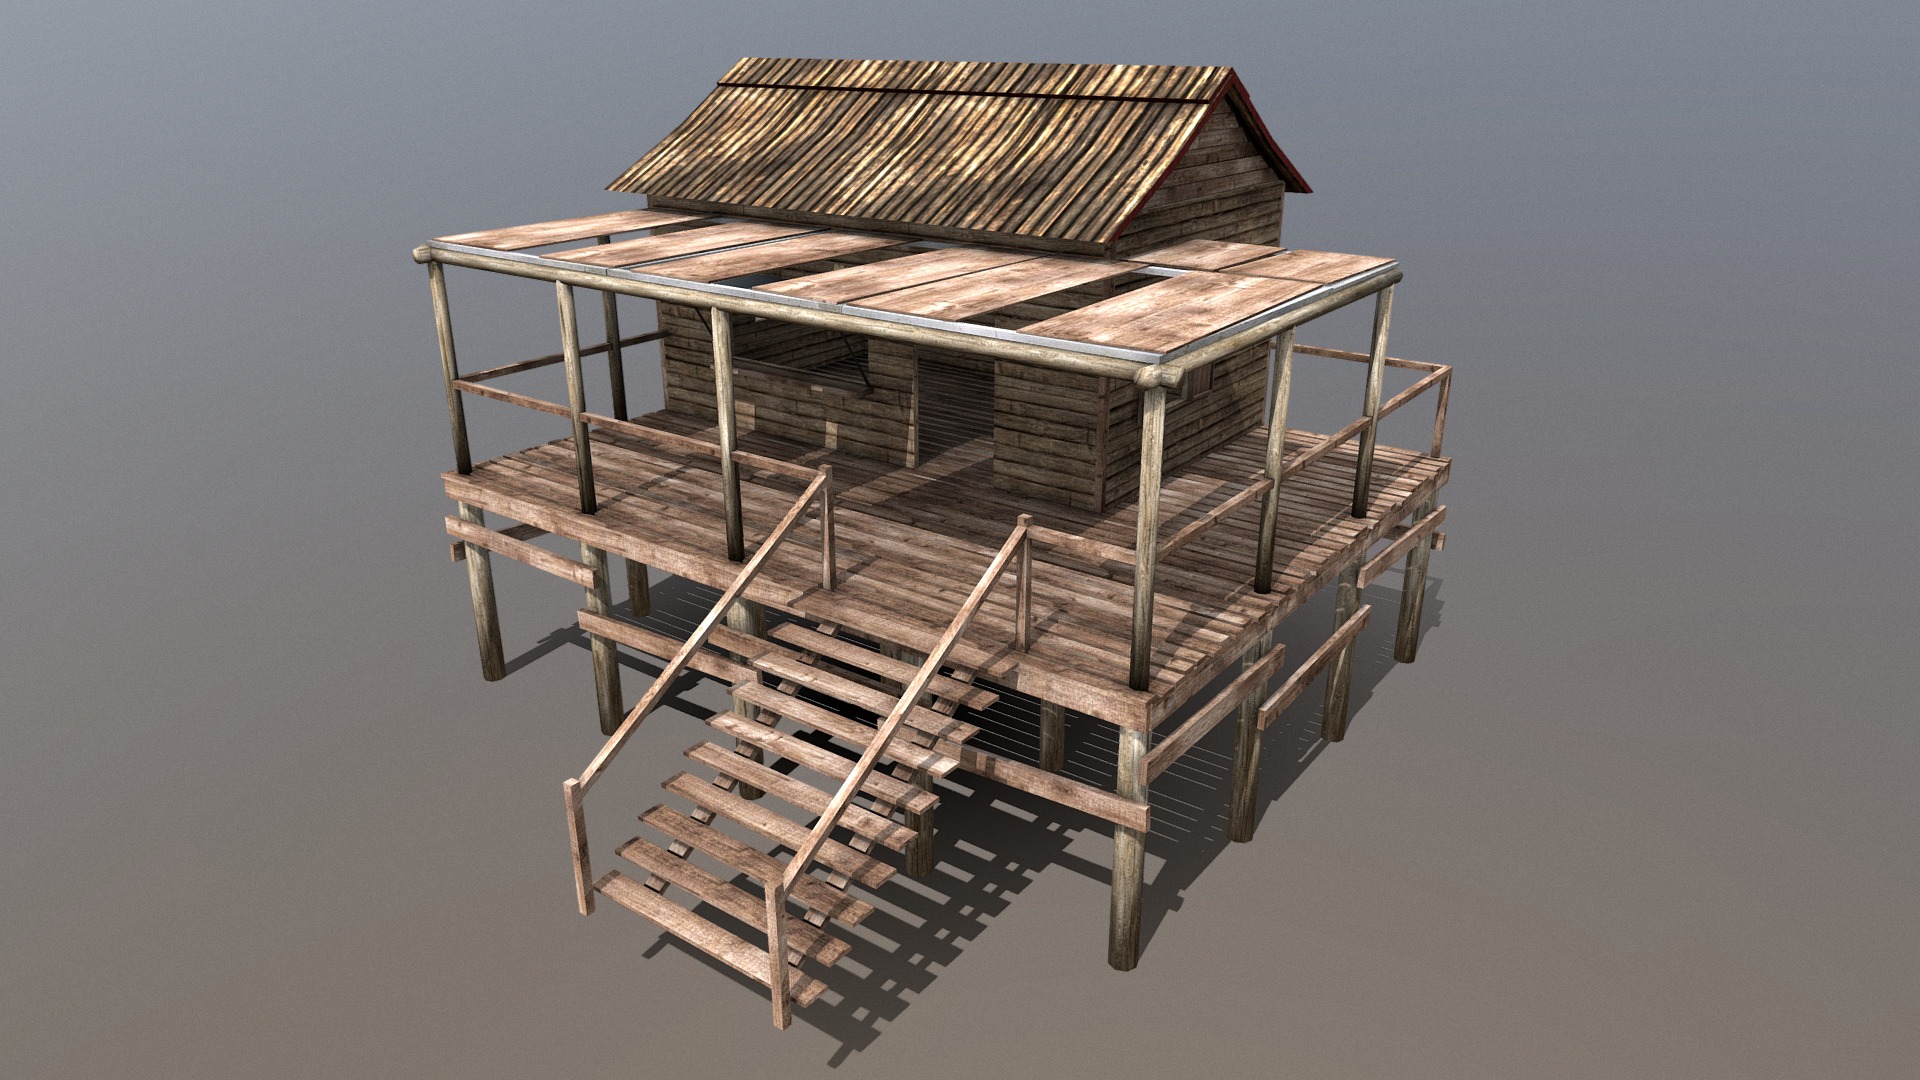 3D model Shack - This is a 3D model of the Shack. The 3D model is about a wooden structure on a white background.